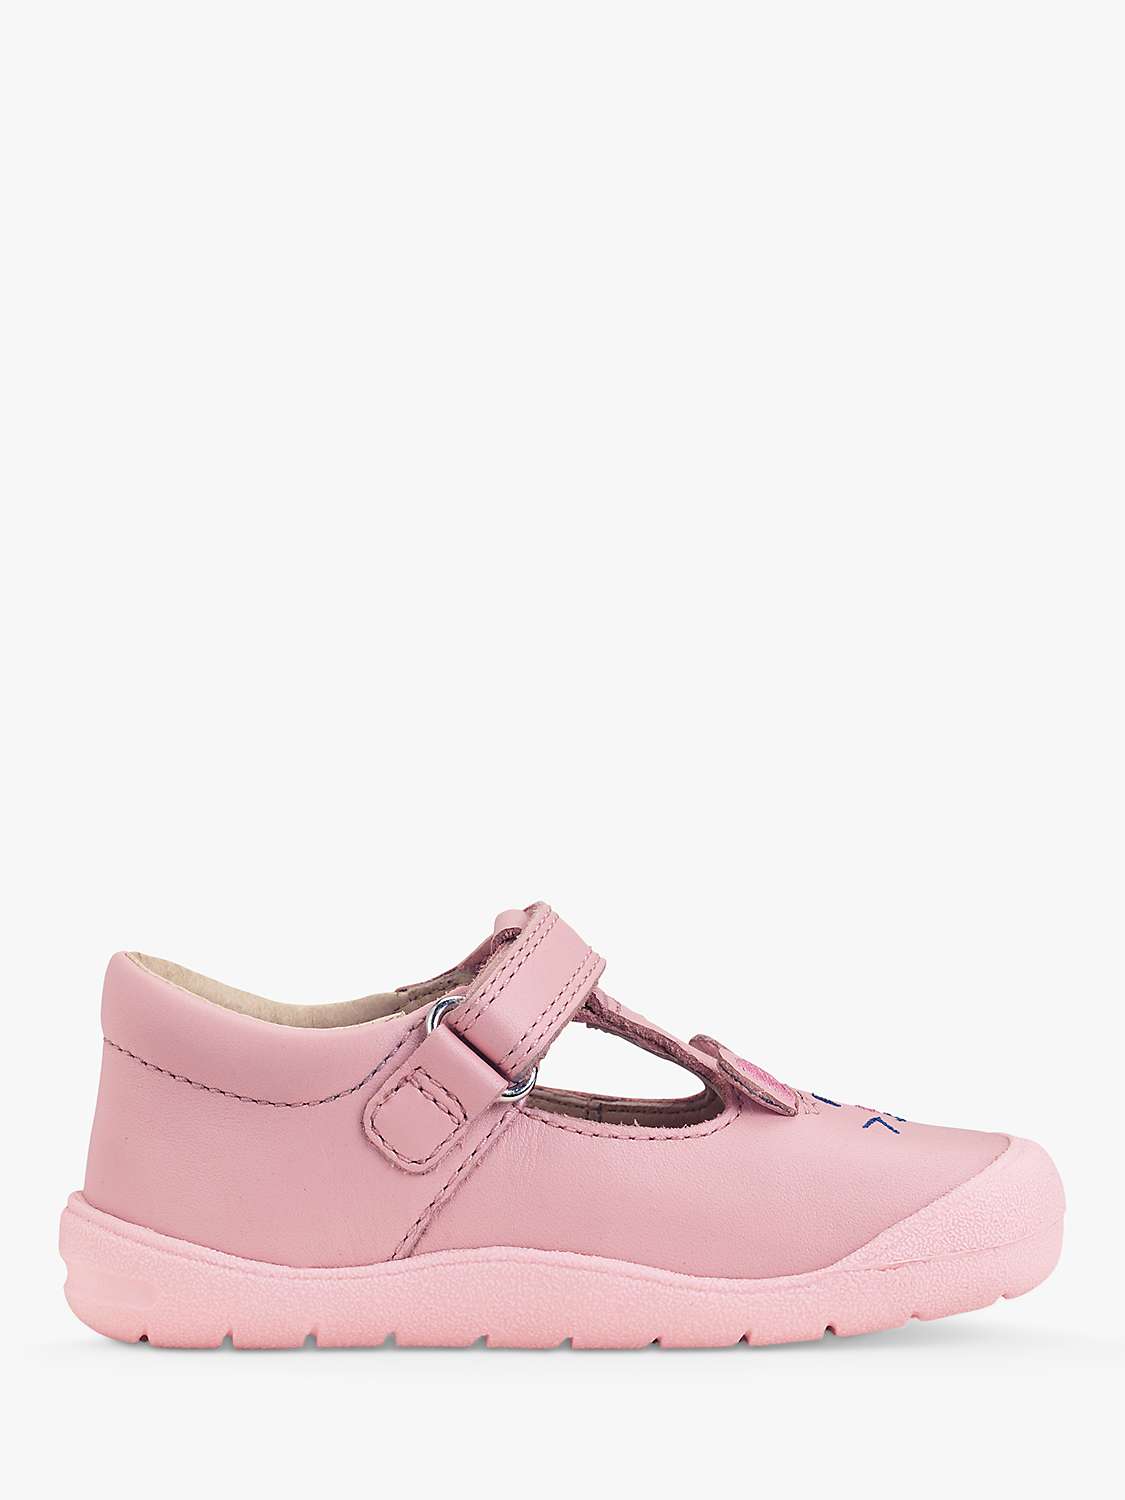 Buy Start-Rite Baby Fellow Leather First Steps Shoes, Pink Online at johnlewis.com